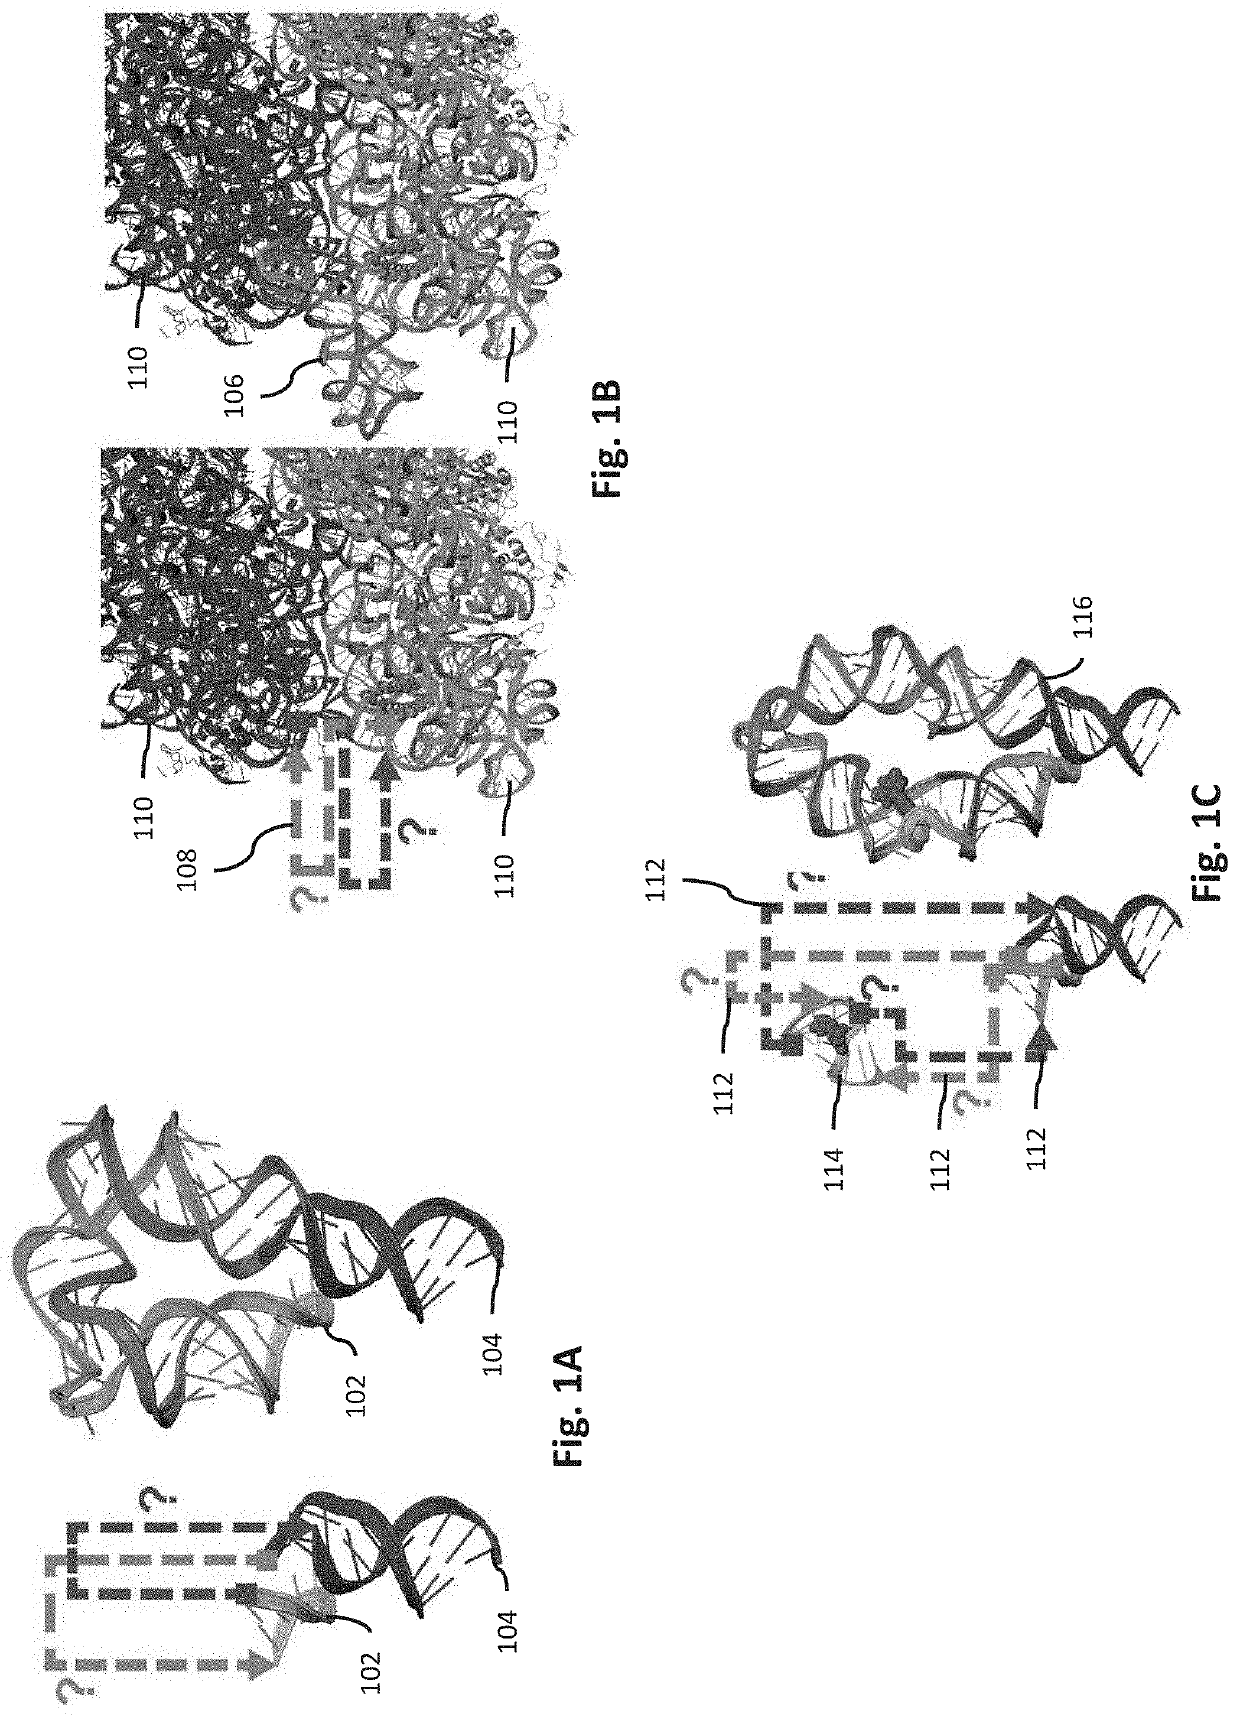 Systems and Methods for Designing RNA Nanostructures and Uses Thereof